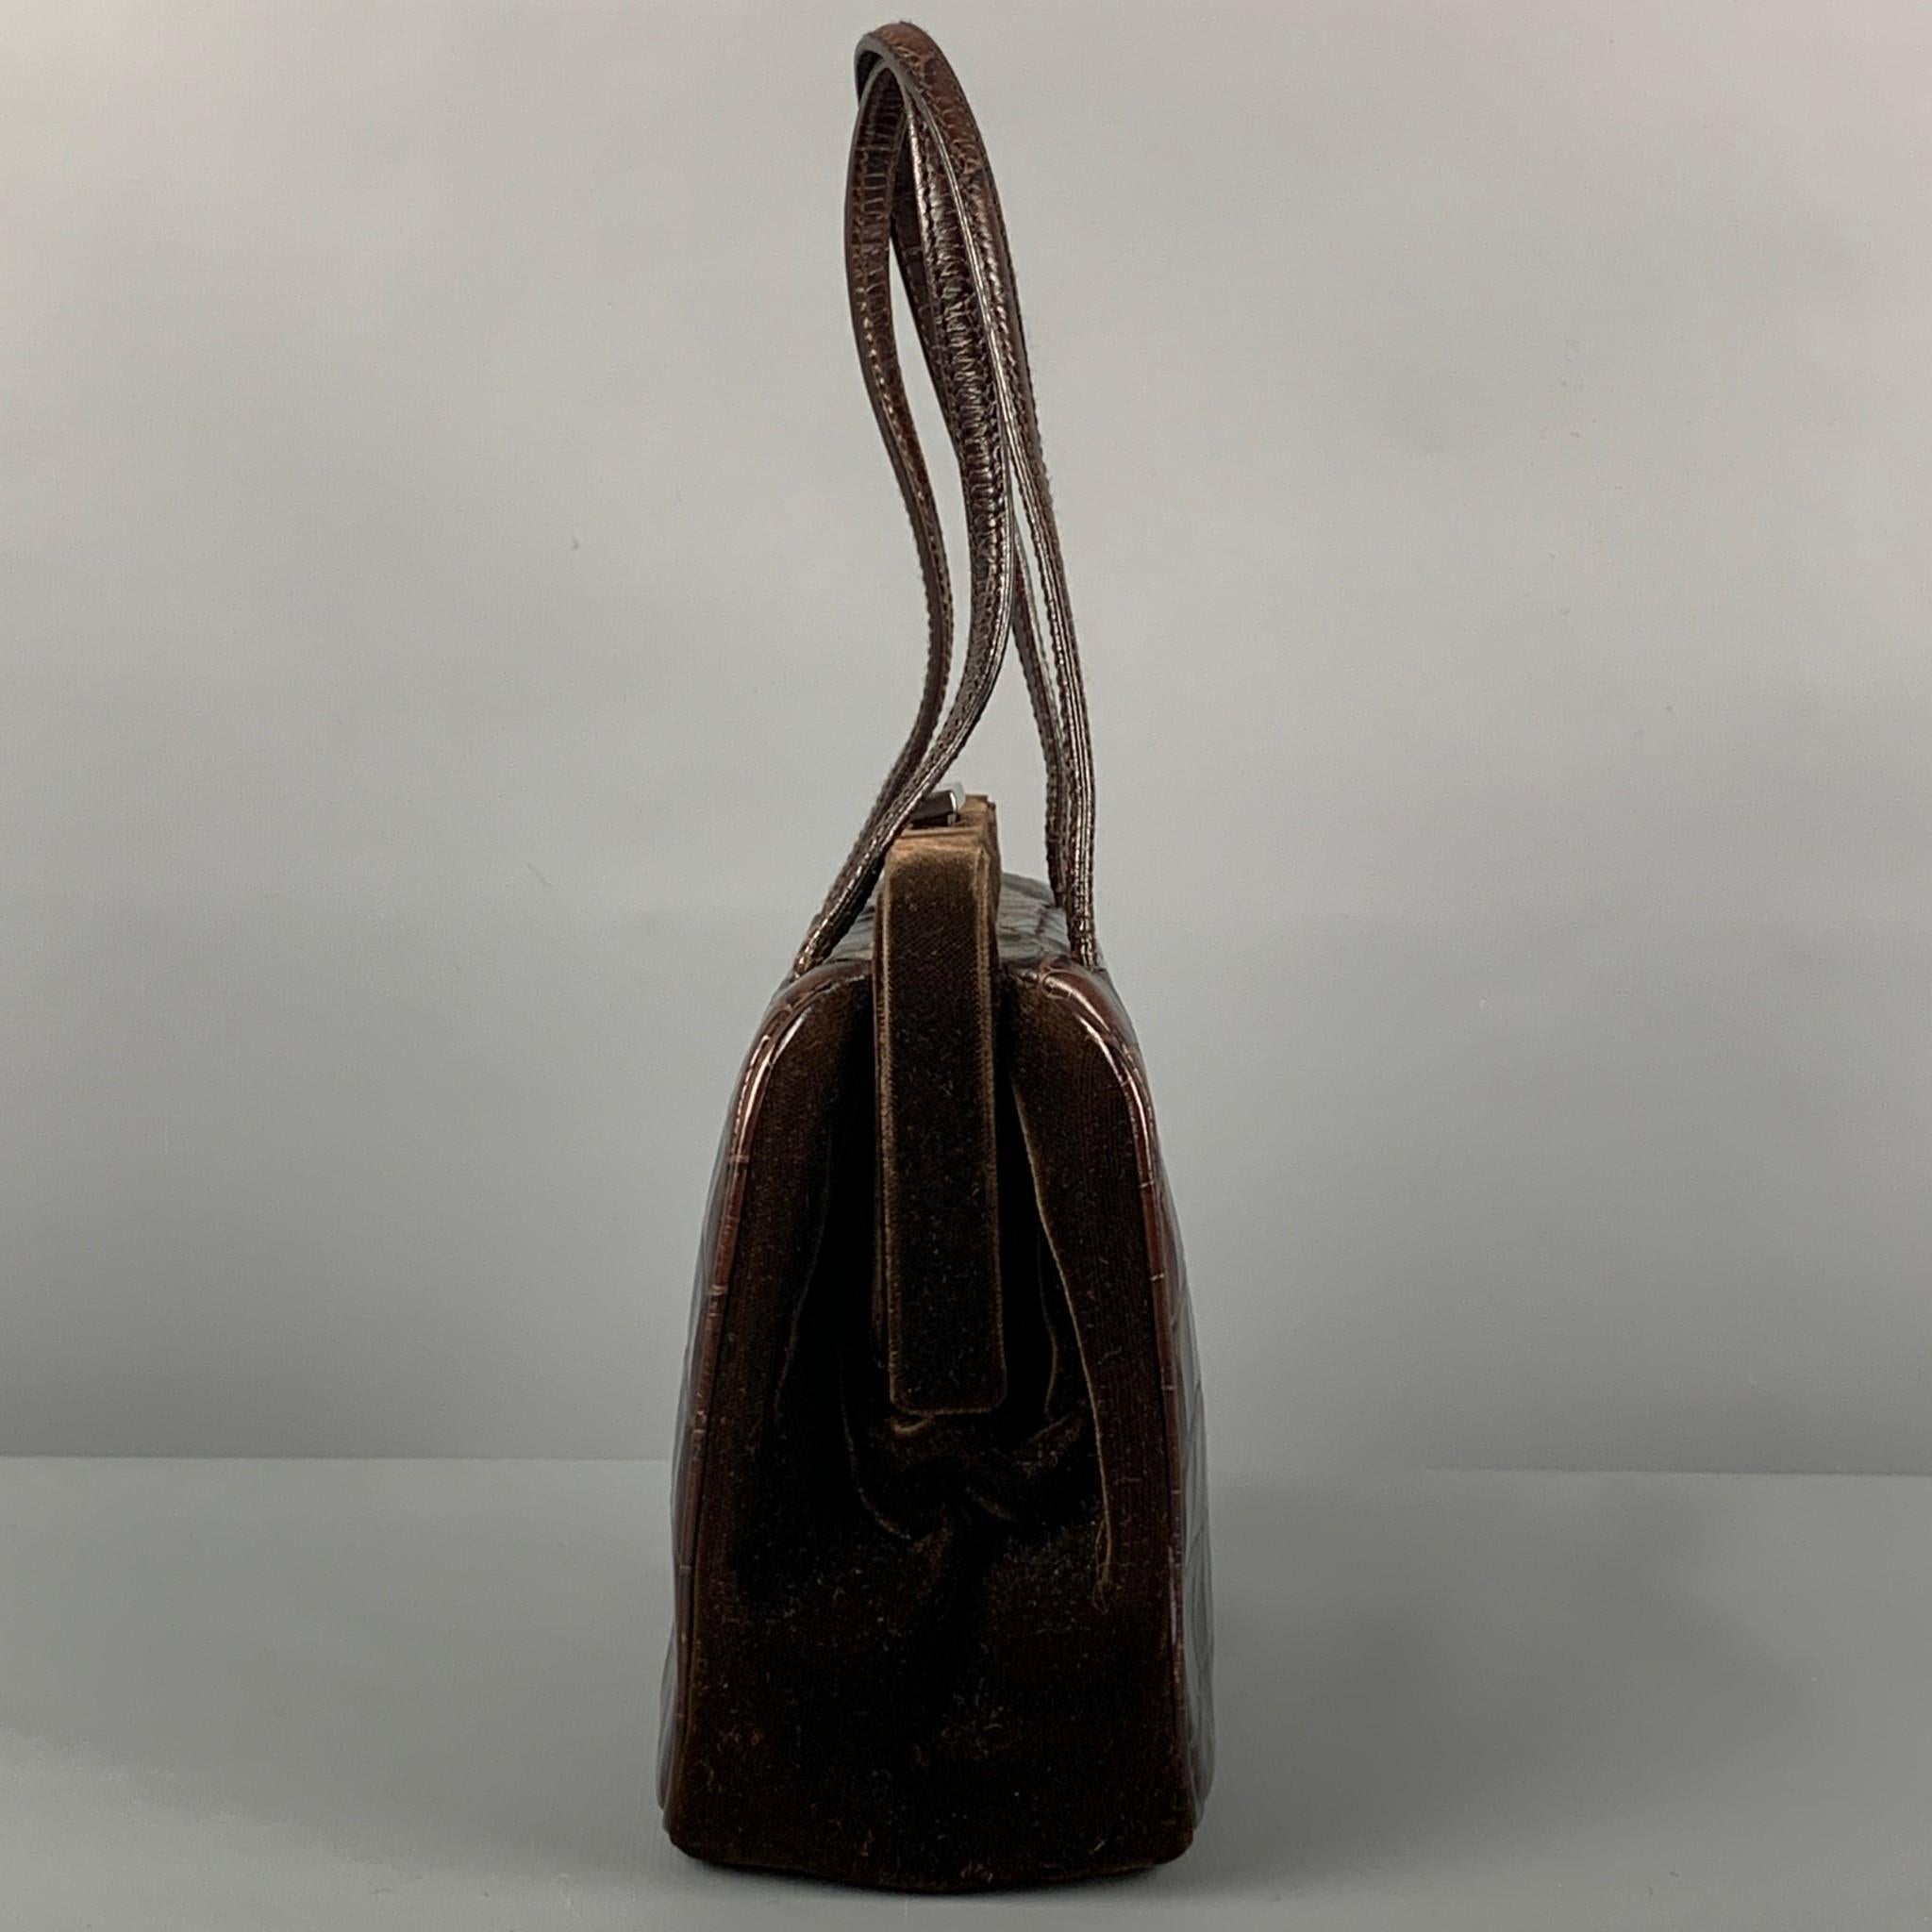 Rare Vintage PRADA mini handbag comes in a brown alligator leather featuring a velvet panel, top handles, inner pocket, and a push open closure. Made in Italy. 

Very Good Pre-Owned Condition.
Marked: 43

Measurements:

Length: 7 in.
Width: 3.25